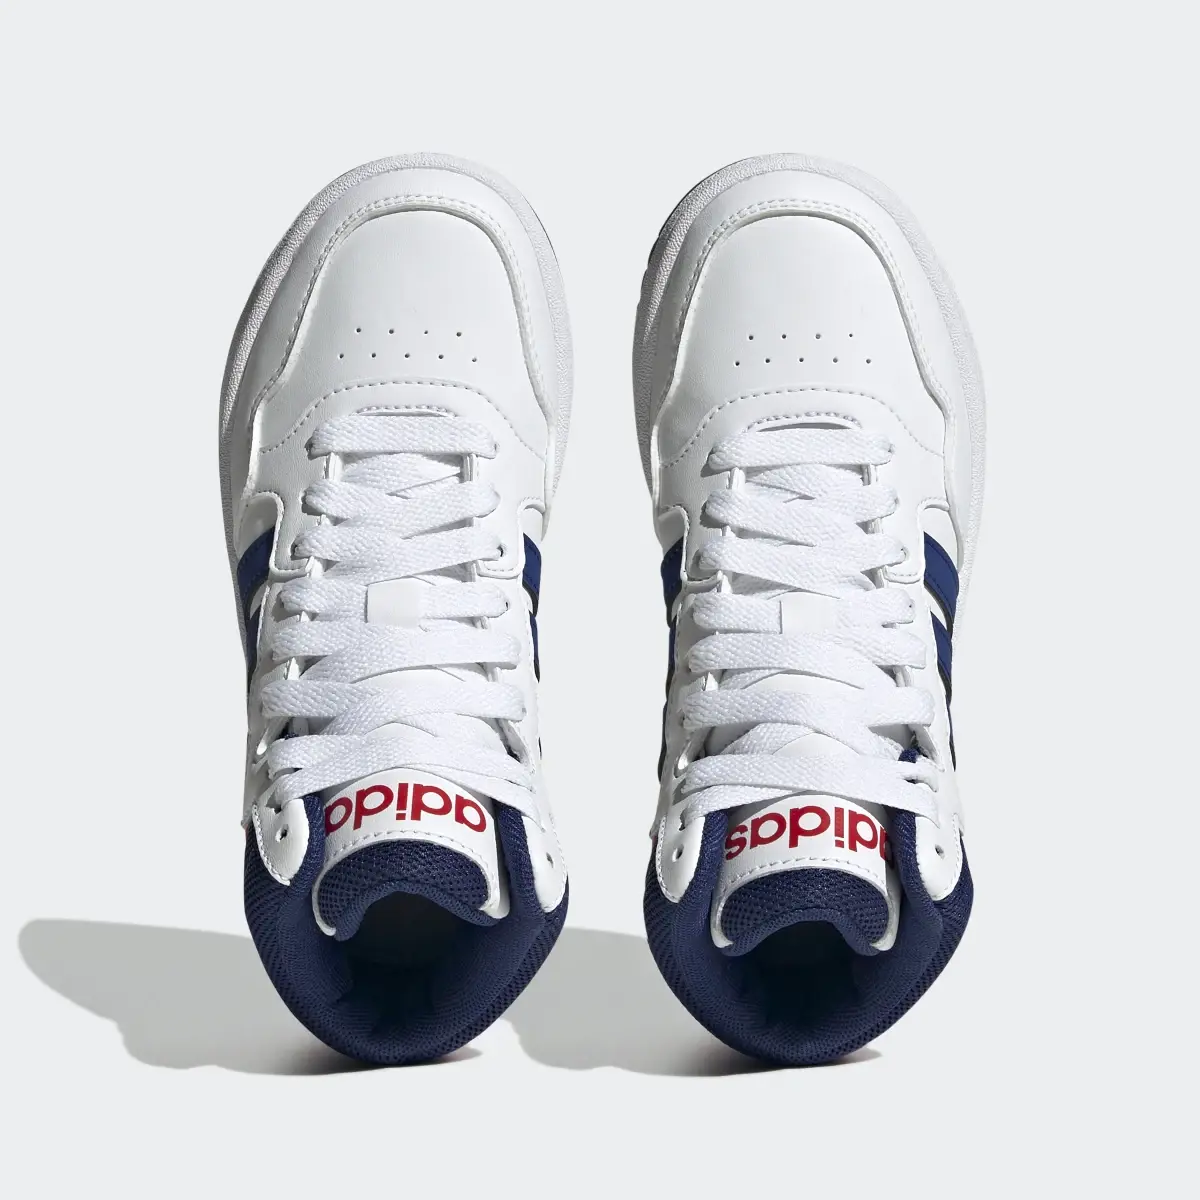 Adidas Hoops Mid Shoes. 3